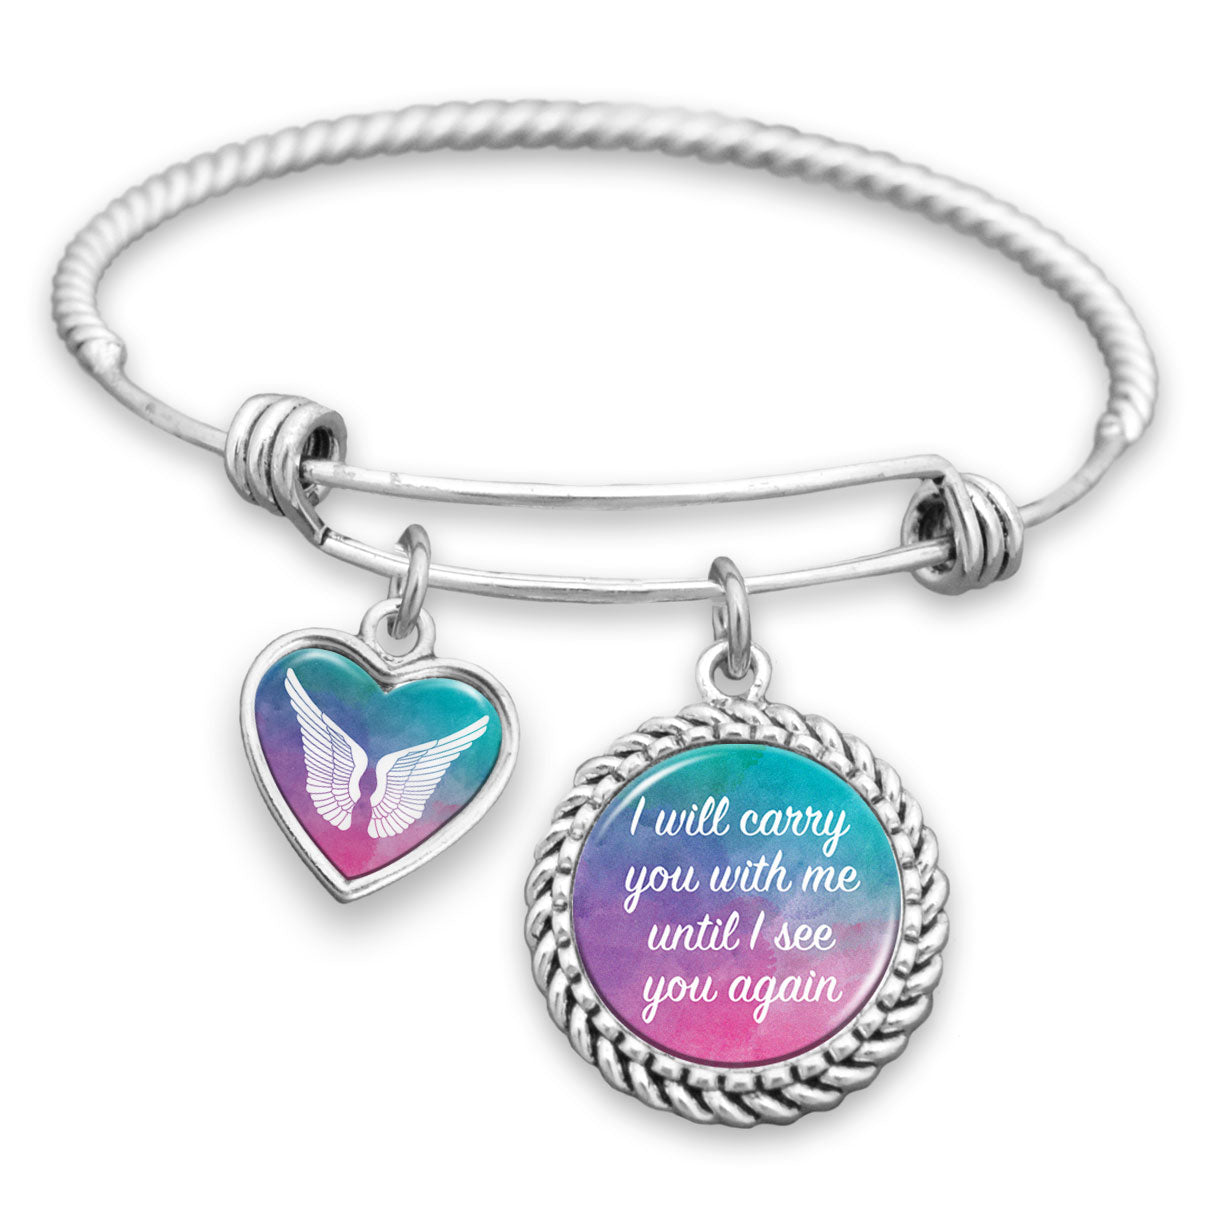 I Will Carry You With Me Until I See You Again Watercolor Charm Bracelet